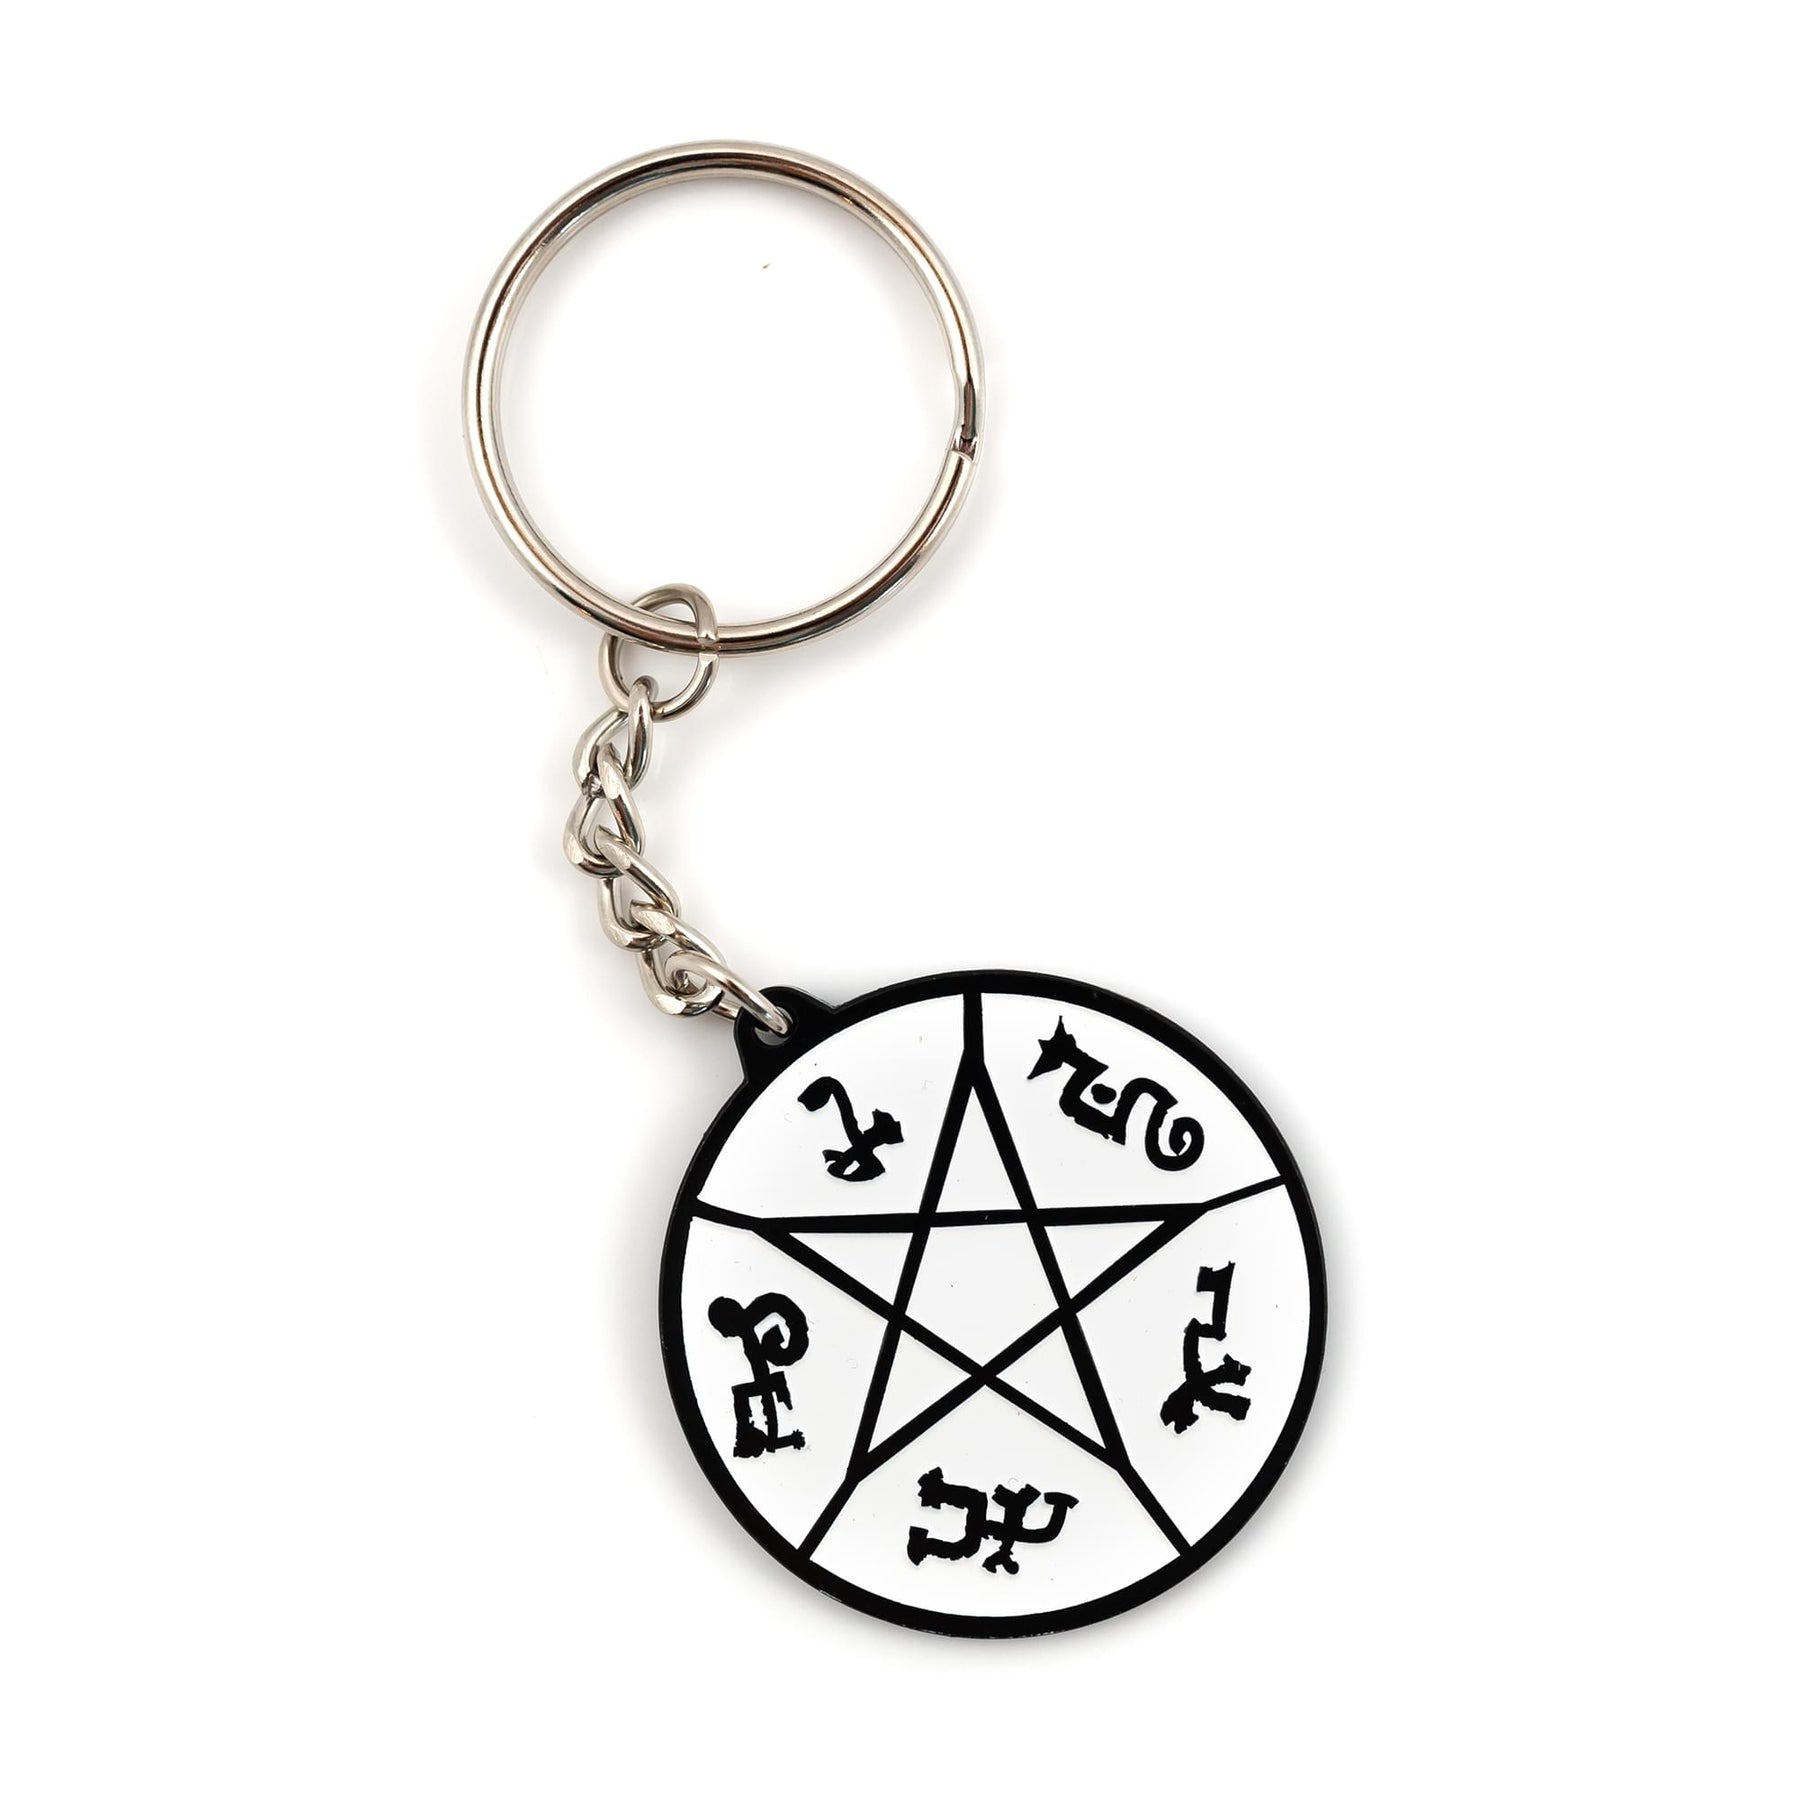 All You Need to Know About Metal Key Chain